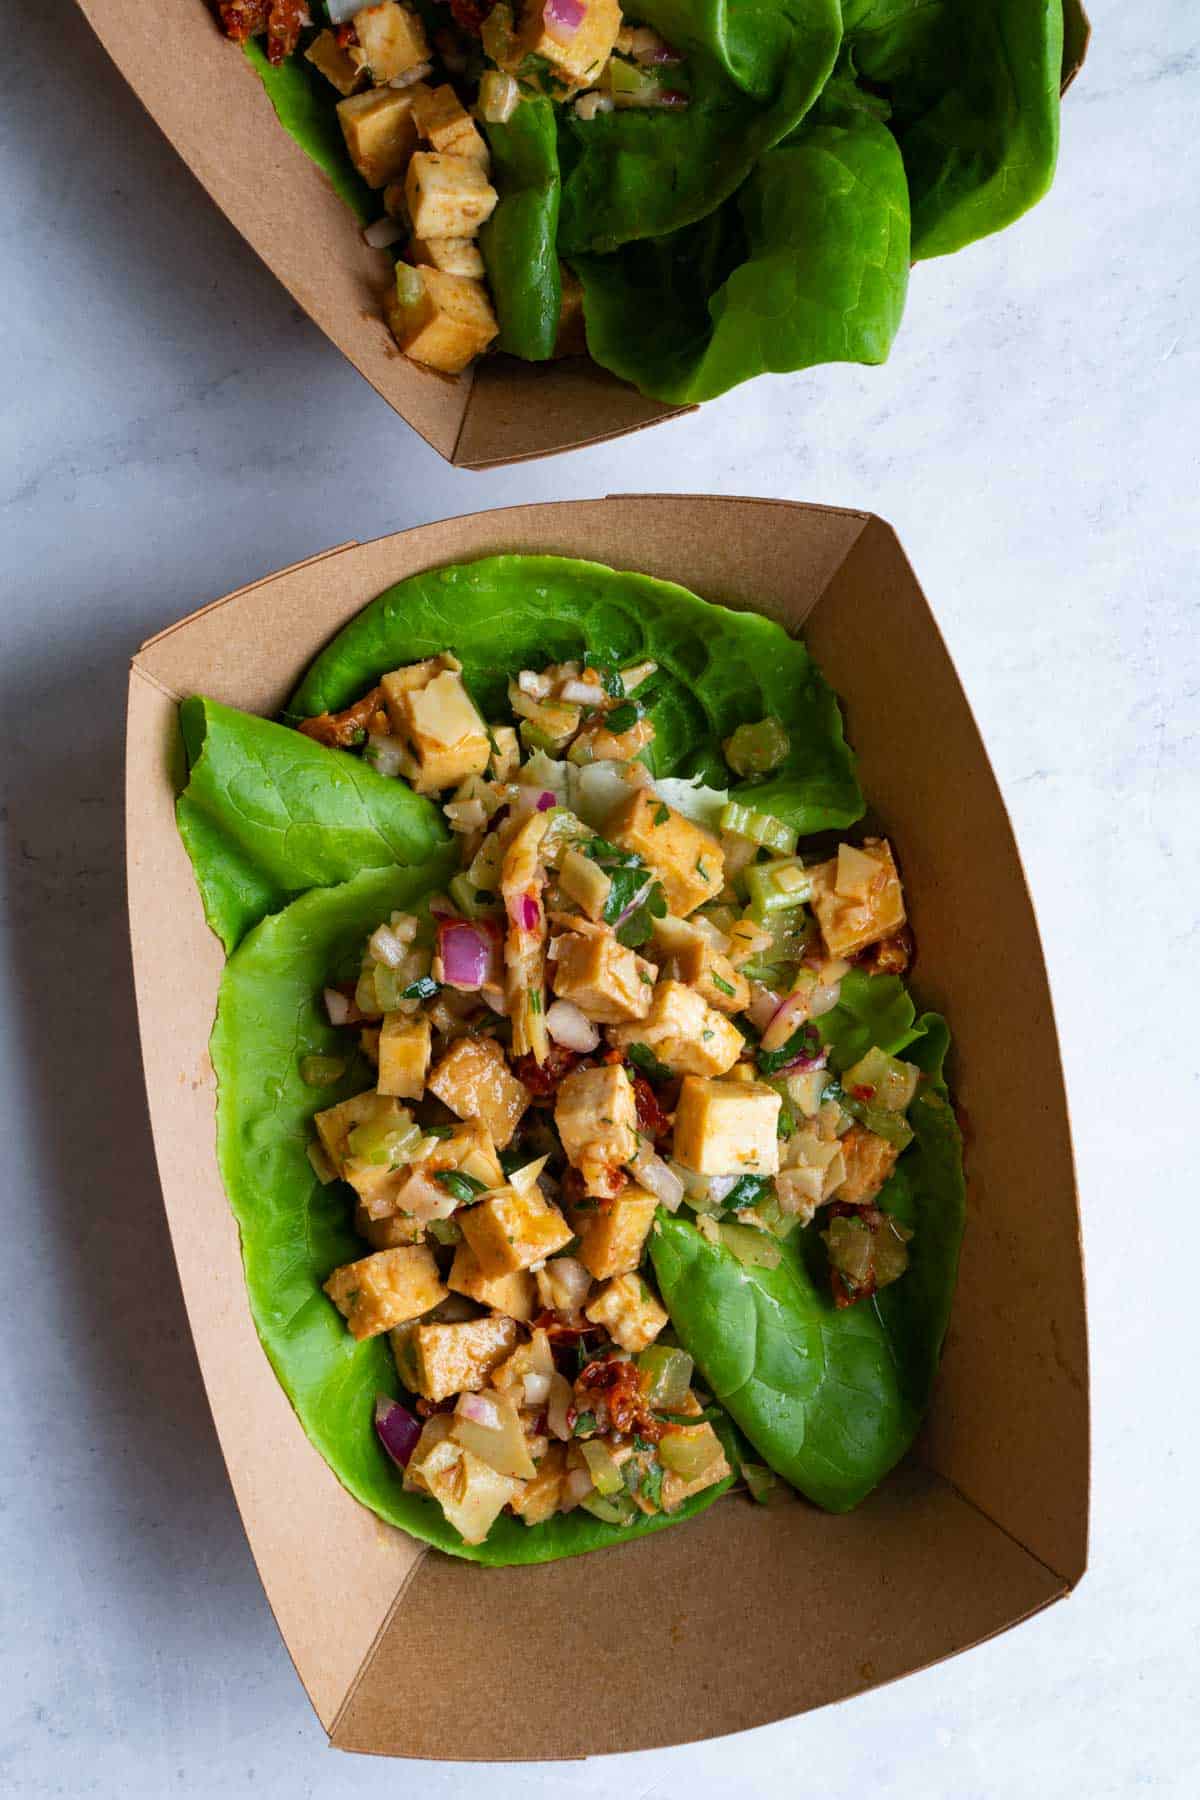 Marinated tofu salad with cubed baked tofu, chopped red onion, parsley, and celery served in lettuce wraps in paper baskets.